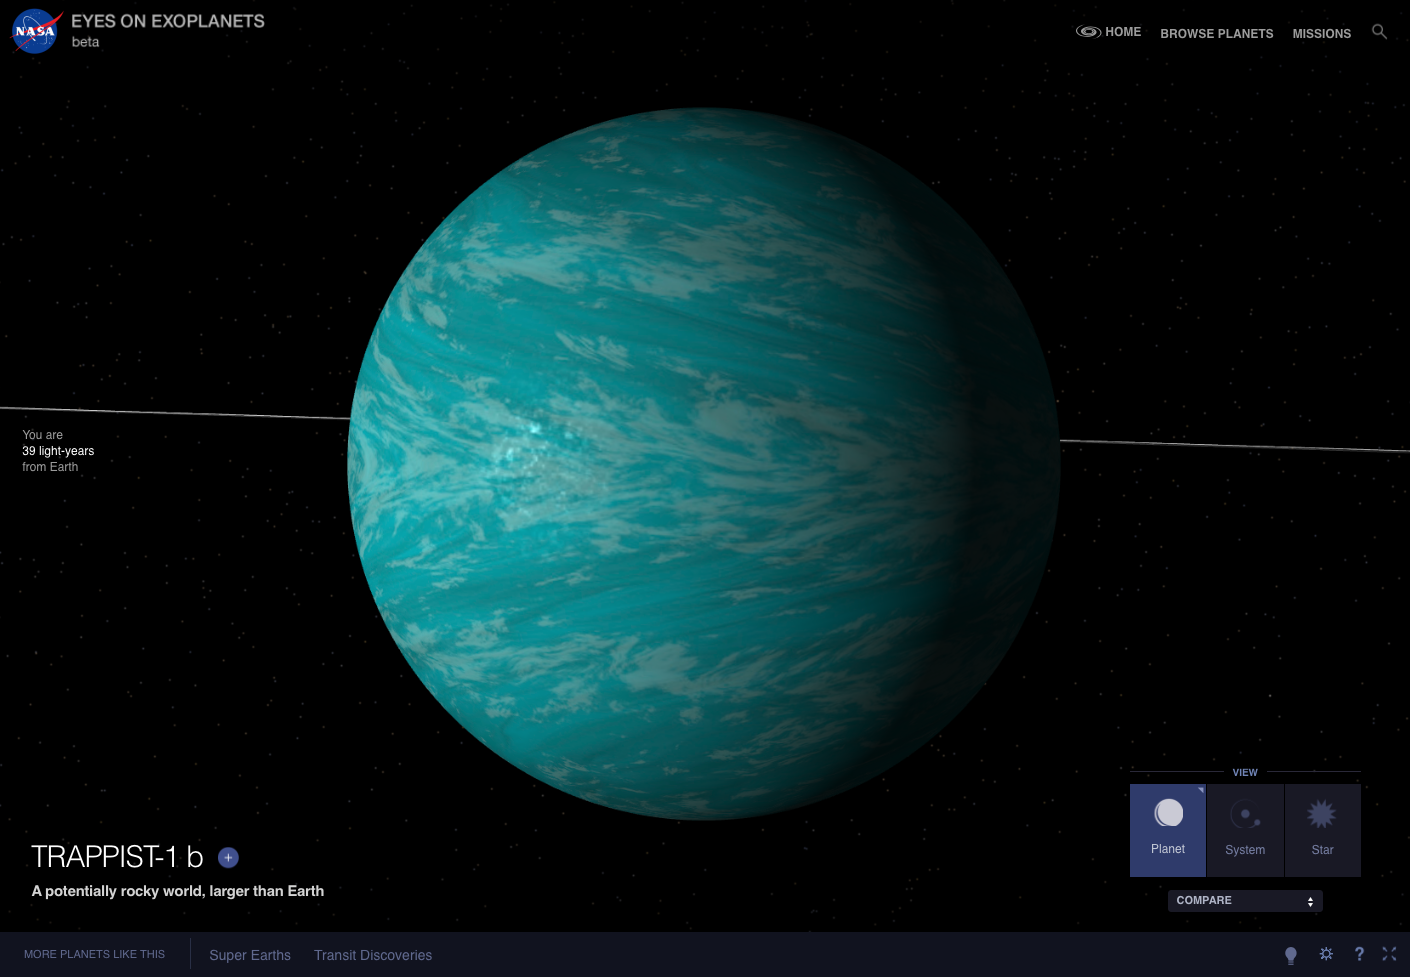 The exoplanet TRAPPIST-1 b is shown as blue in an artist's visualization.